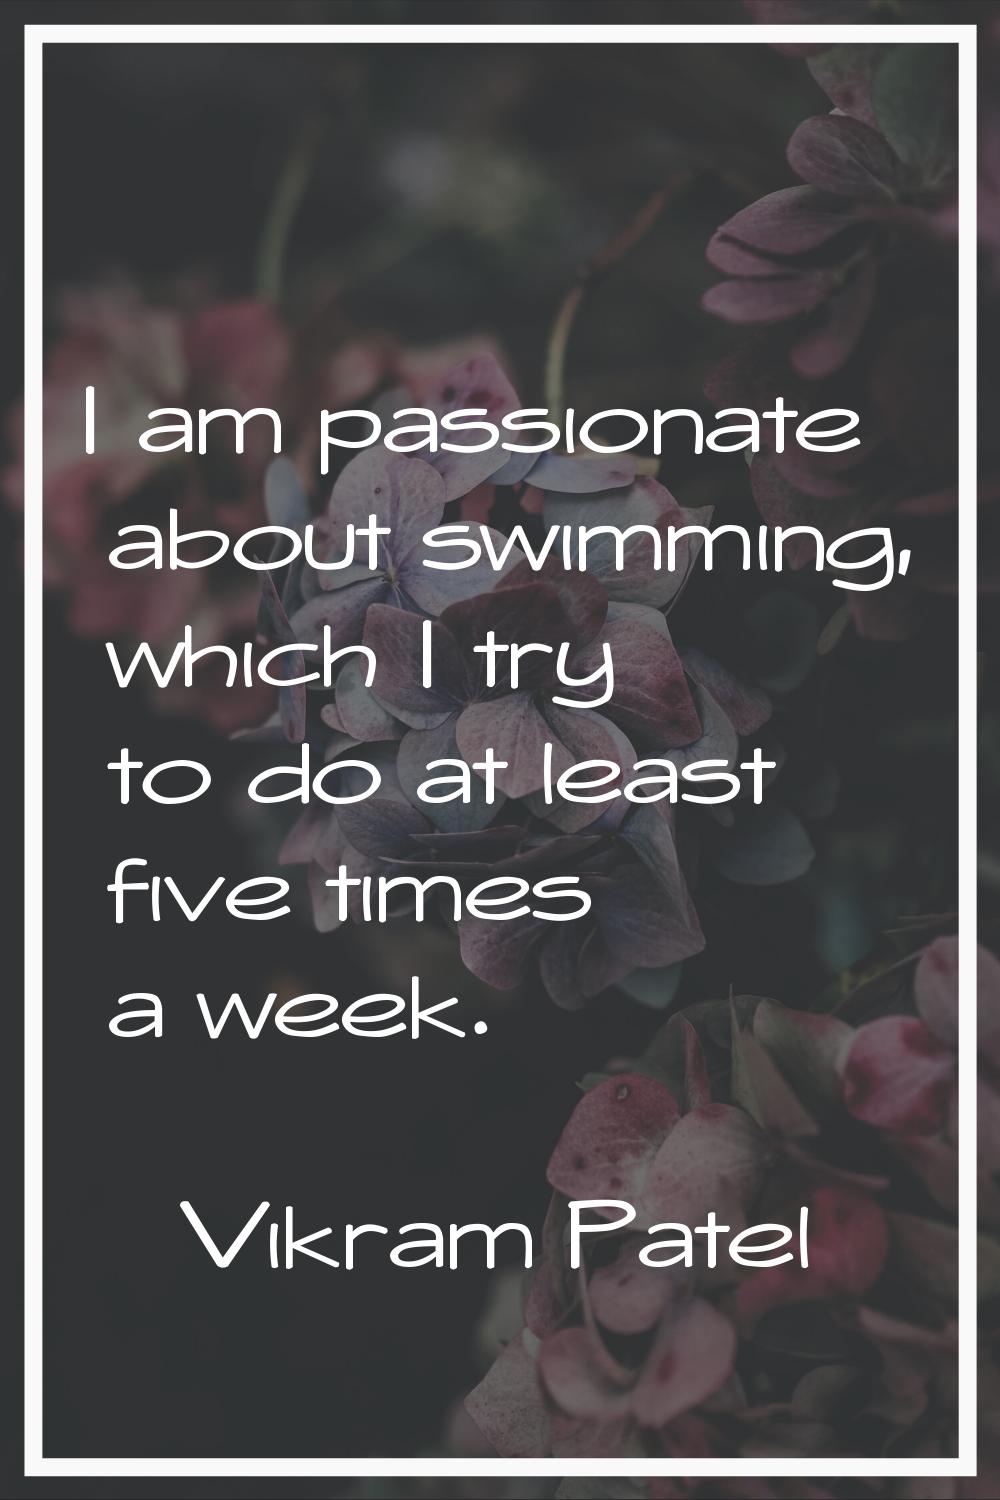 I am passionate about swimming, which I try to do at least five times a week.